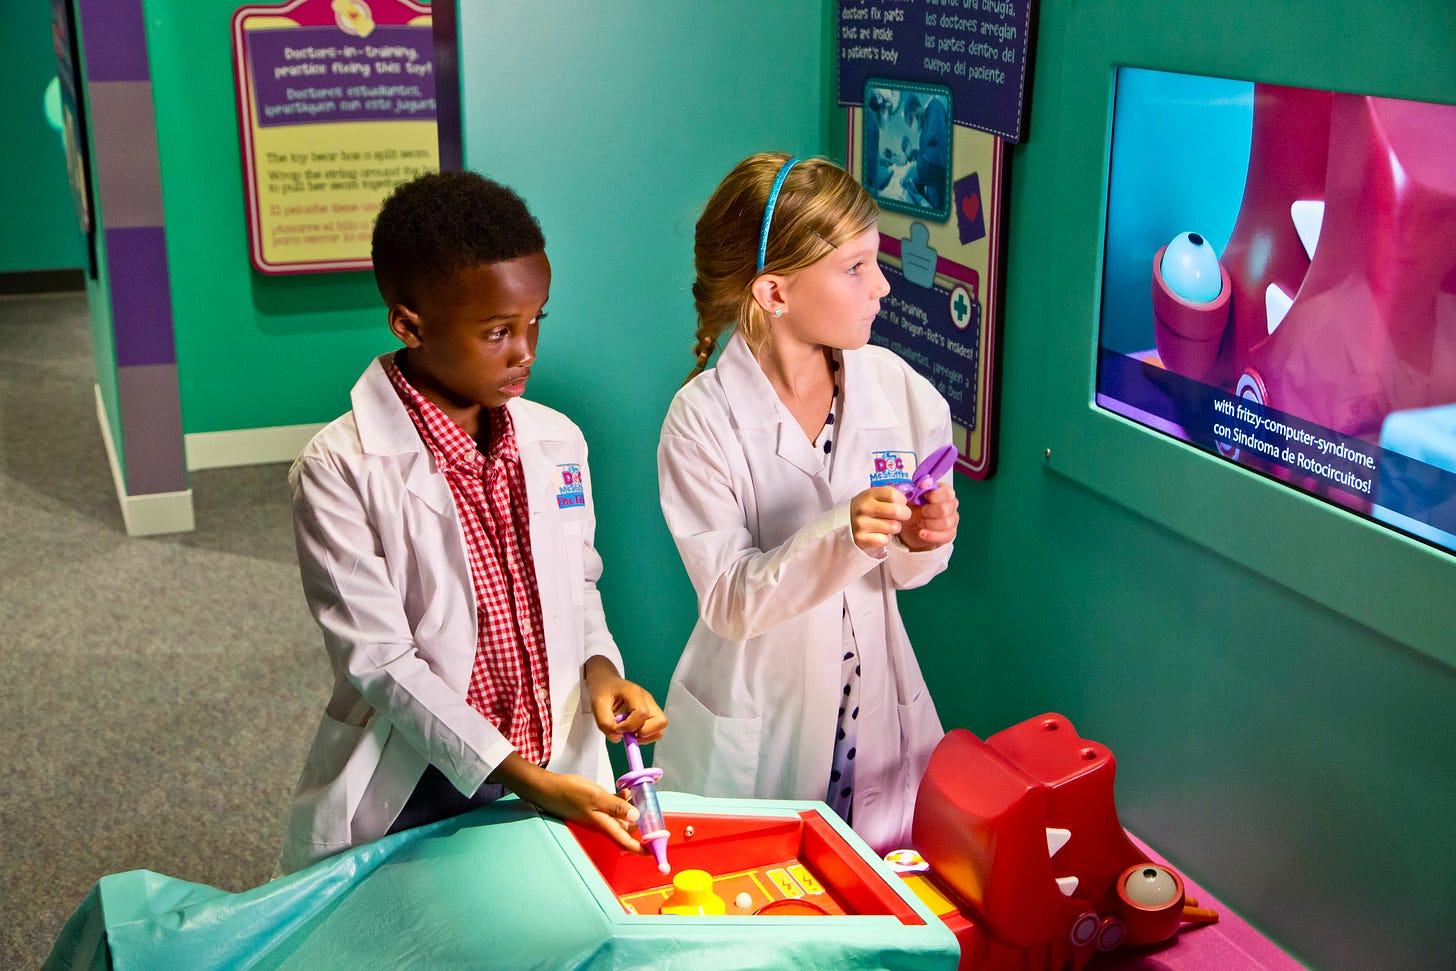 Two children in doctor's coats operate on an ailing robot